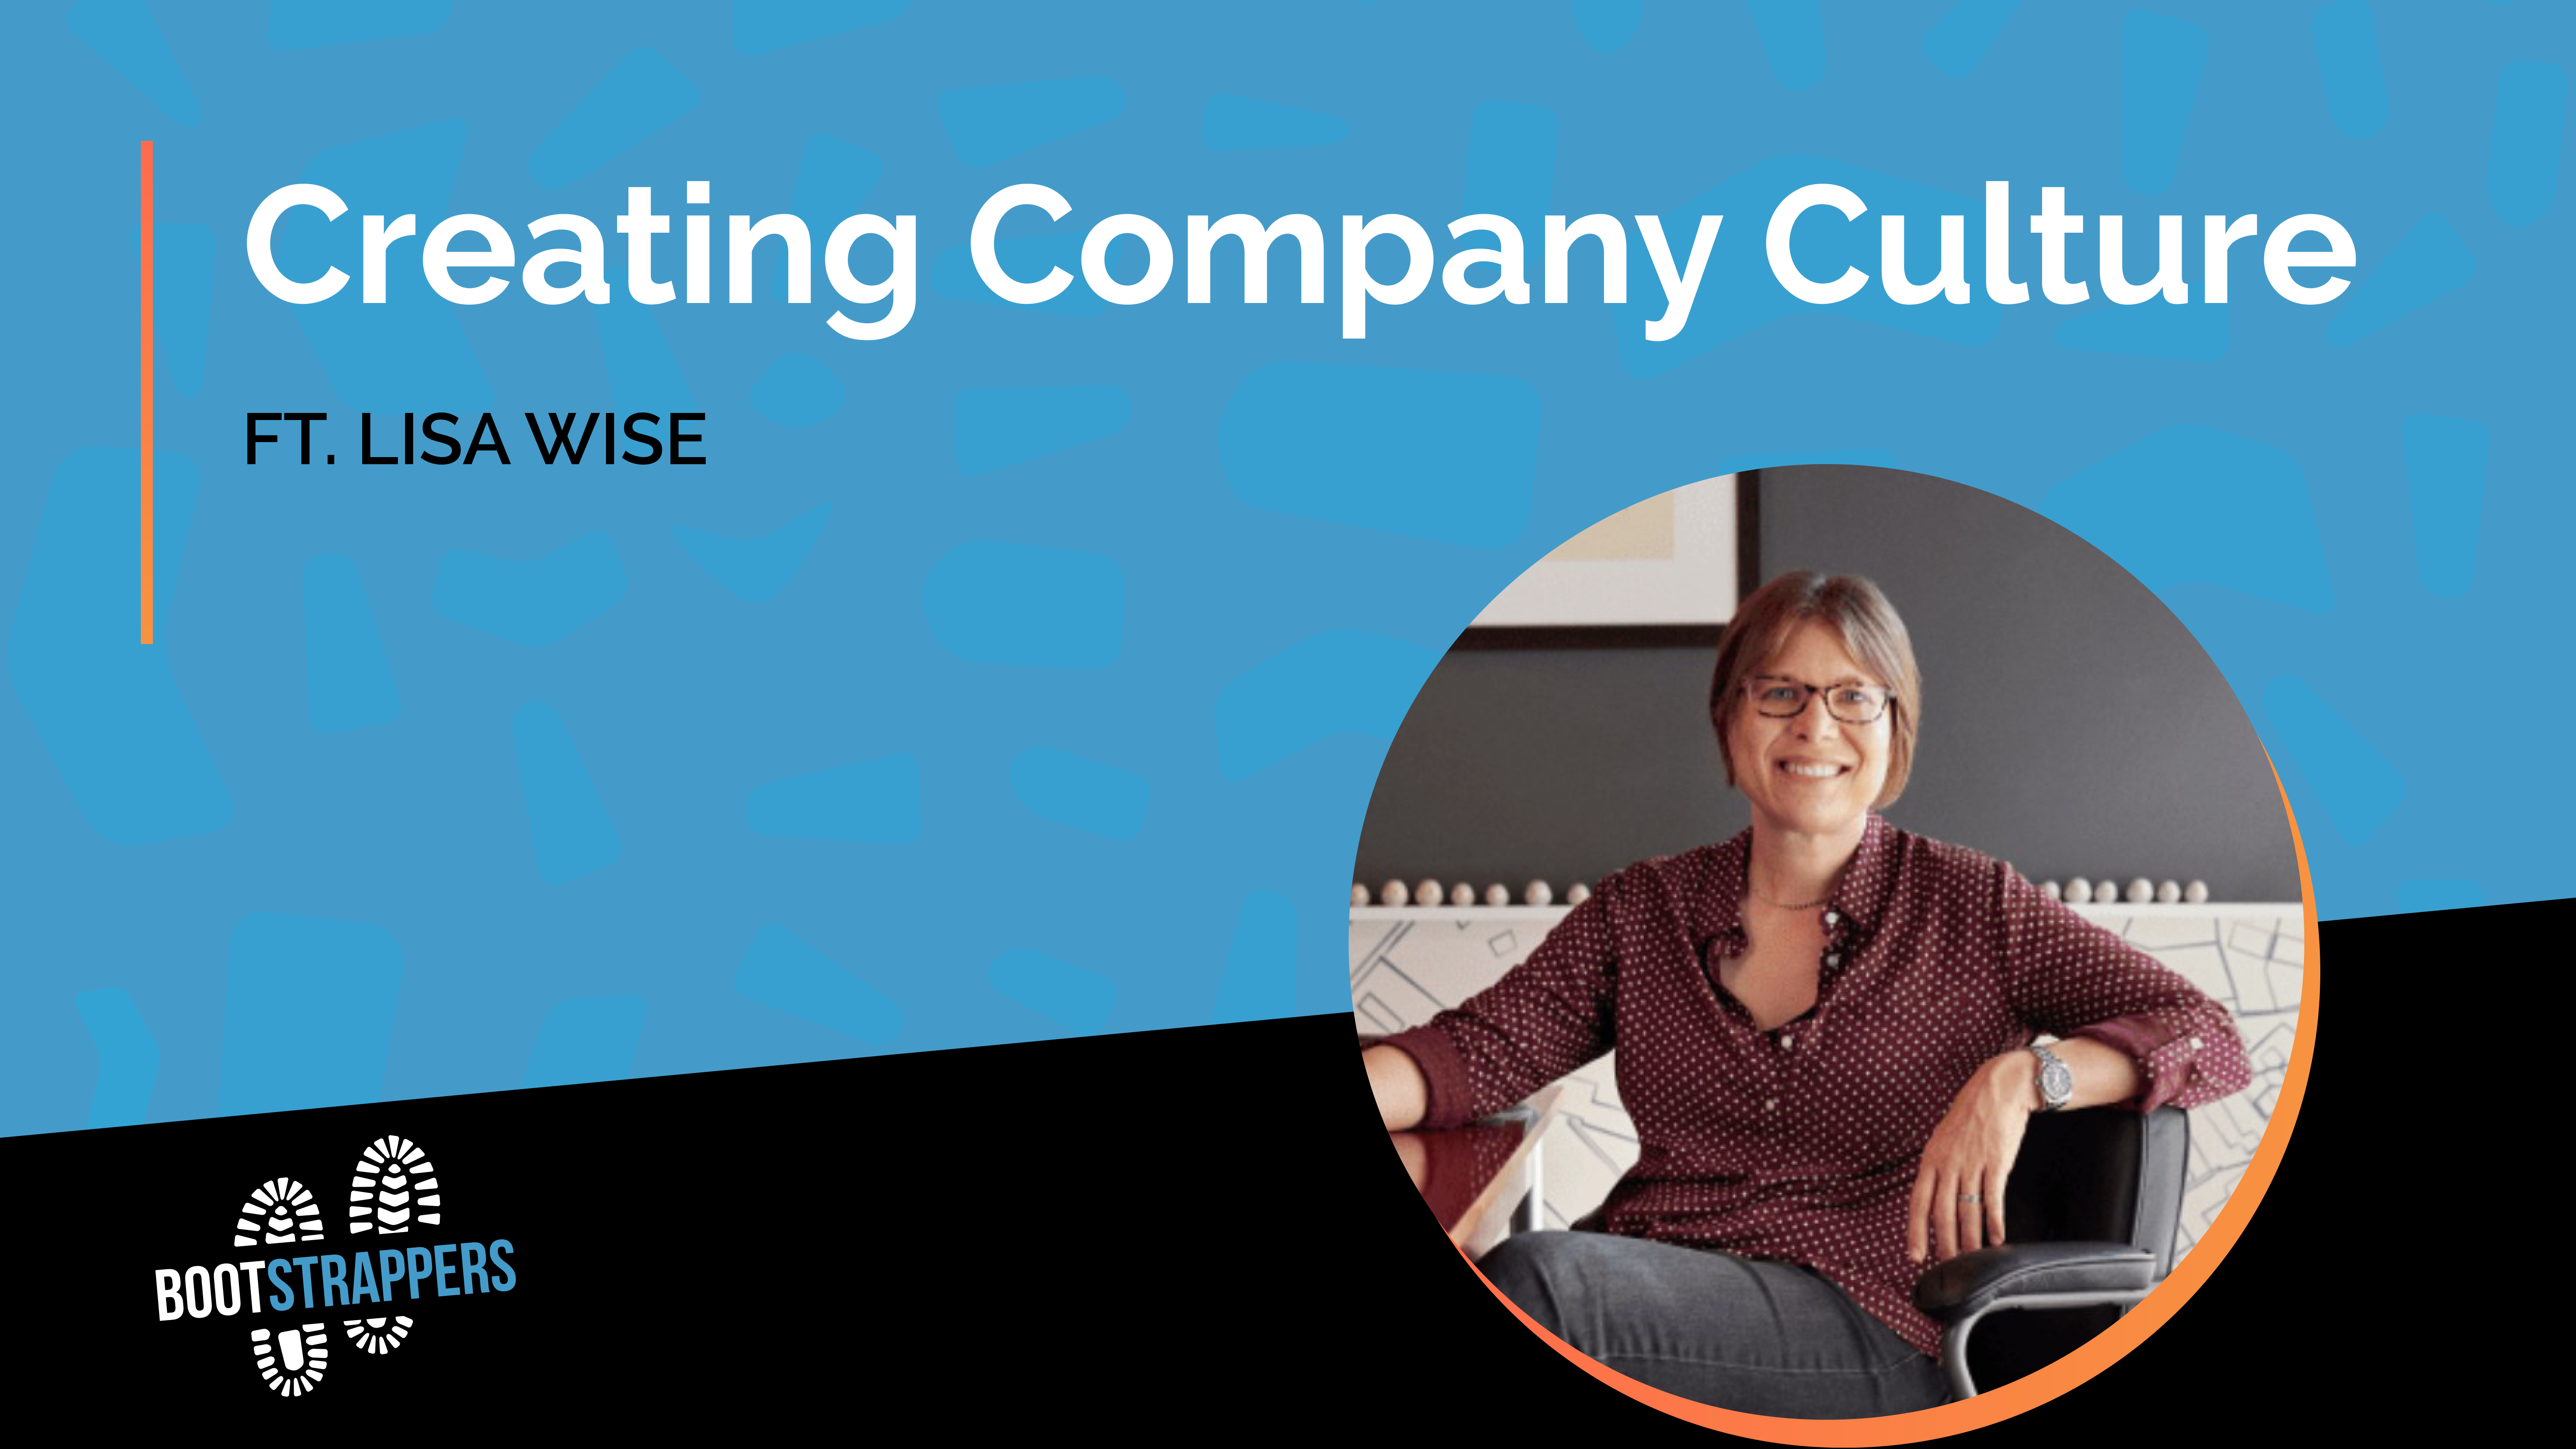 anequim-property-management-bootstrappers-creating-company-culture-lisa-wise